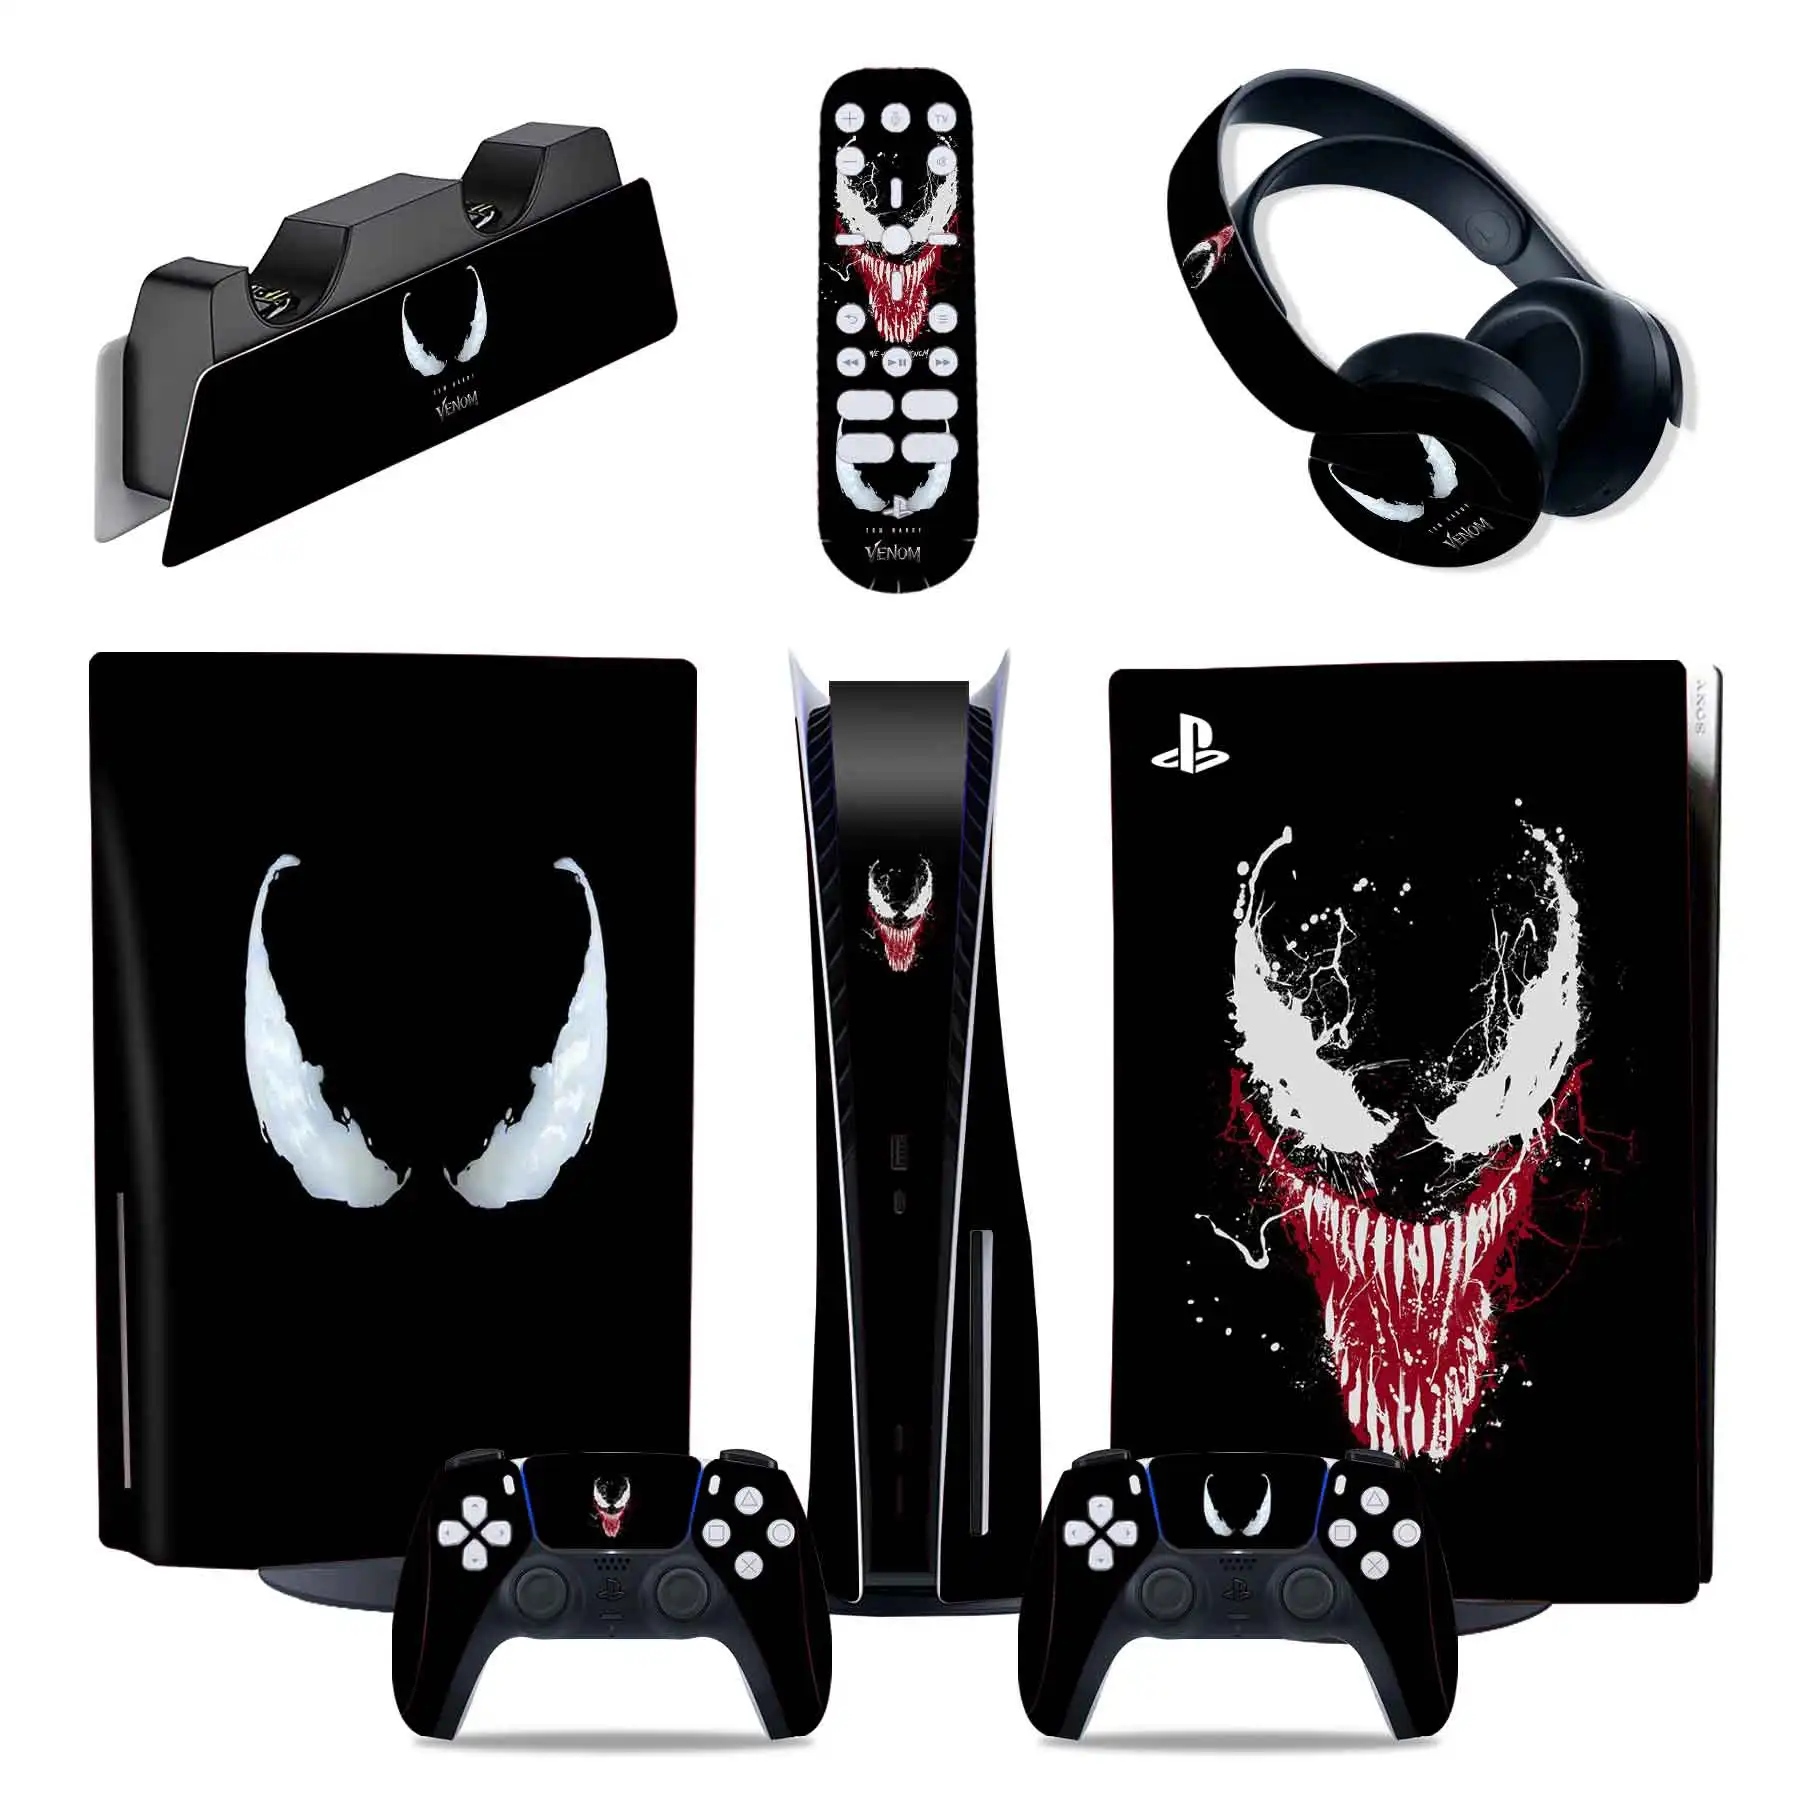 

venom 5 in 1 Set PS5 Standard Disc Edition Skin Sticker Decal Cover for PlayStation 5 Console & Controller 5 in 1 Skin Sticker